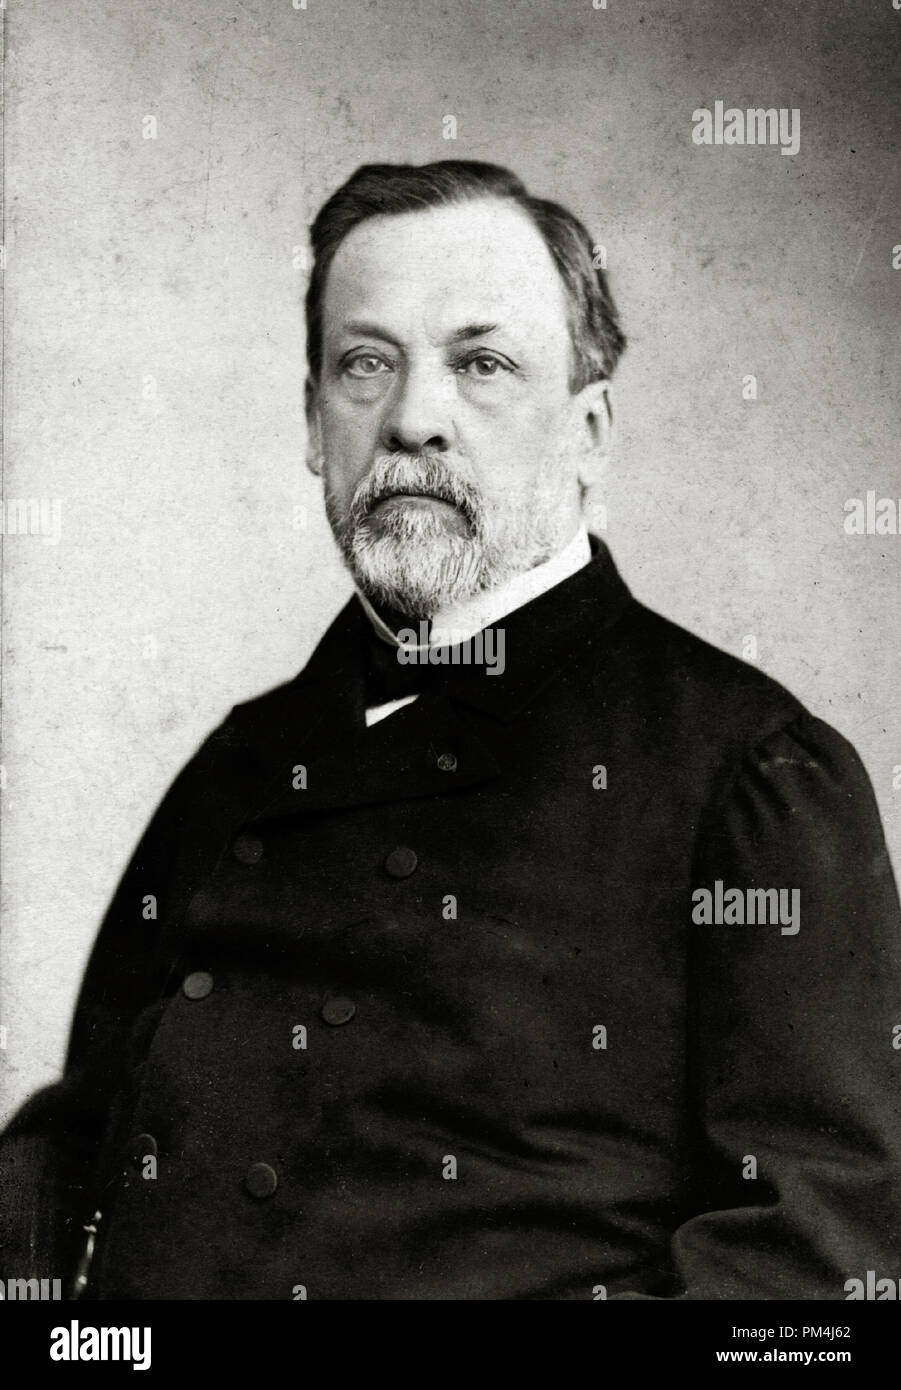 French scientist Louis Pasteur (1822 - 1895), father of modern bacteriology, circa 1891   File Reference # 1003 551THA Stock Photo